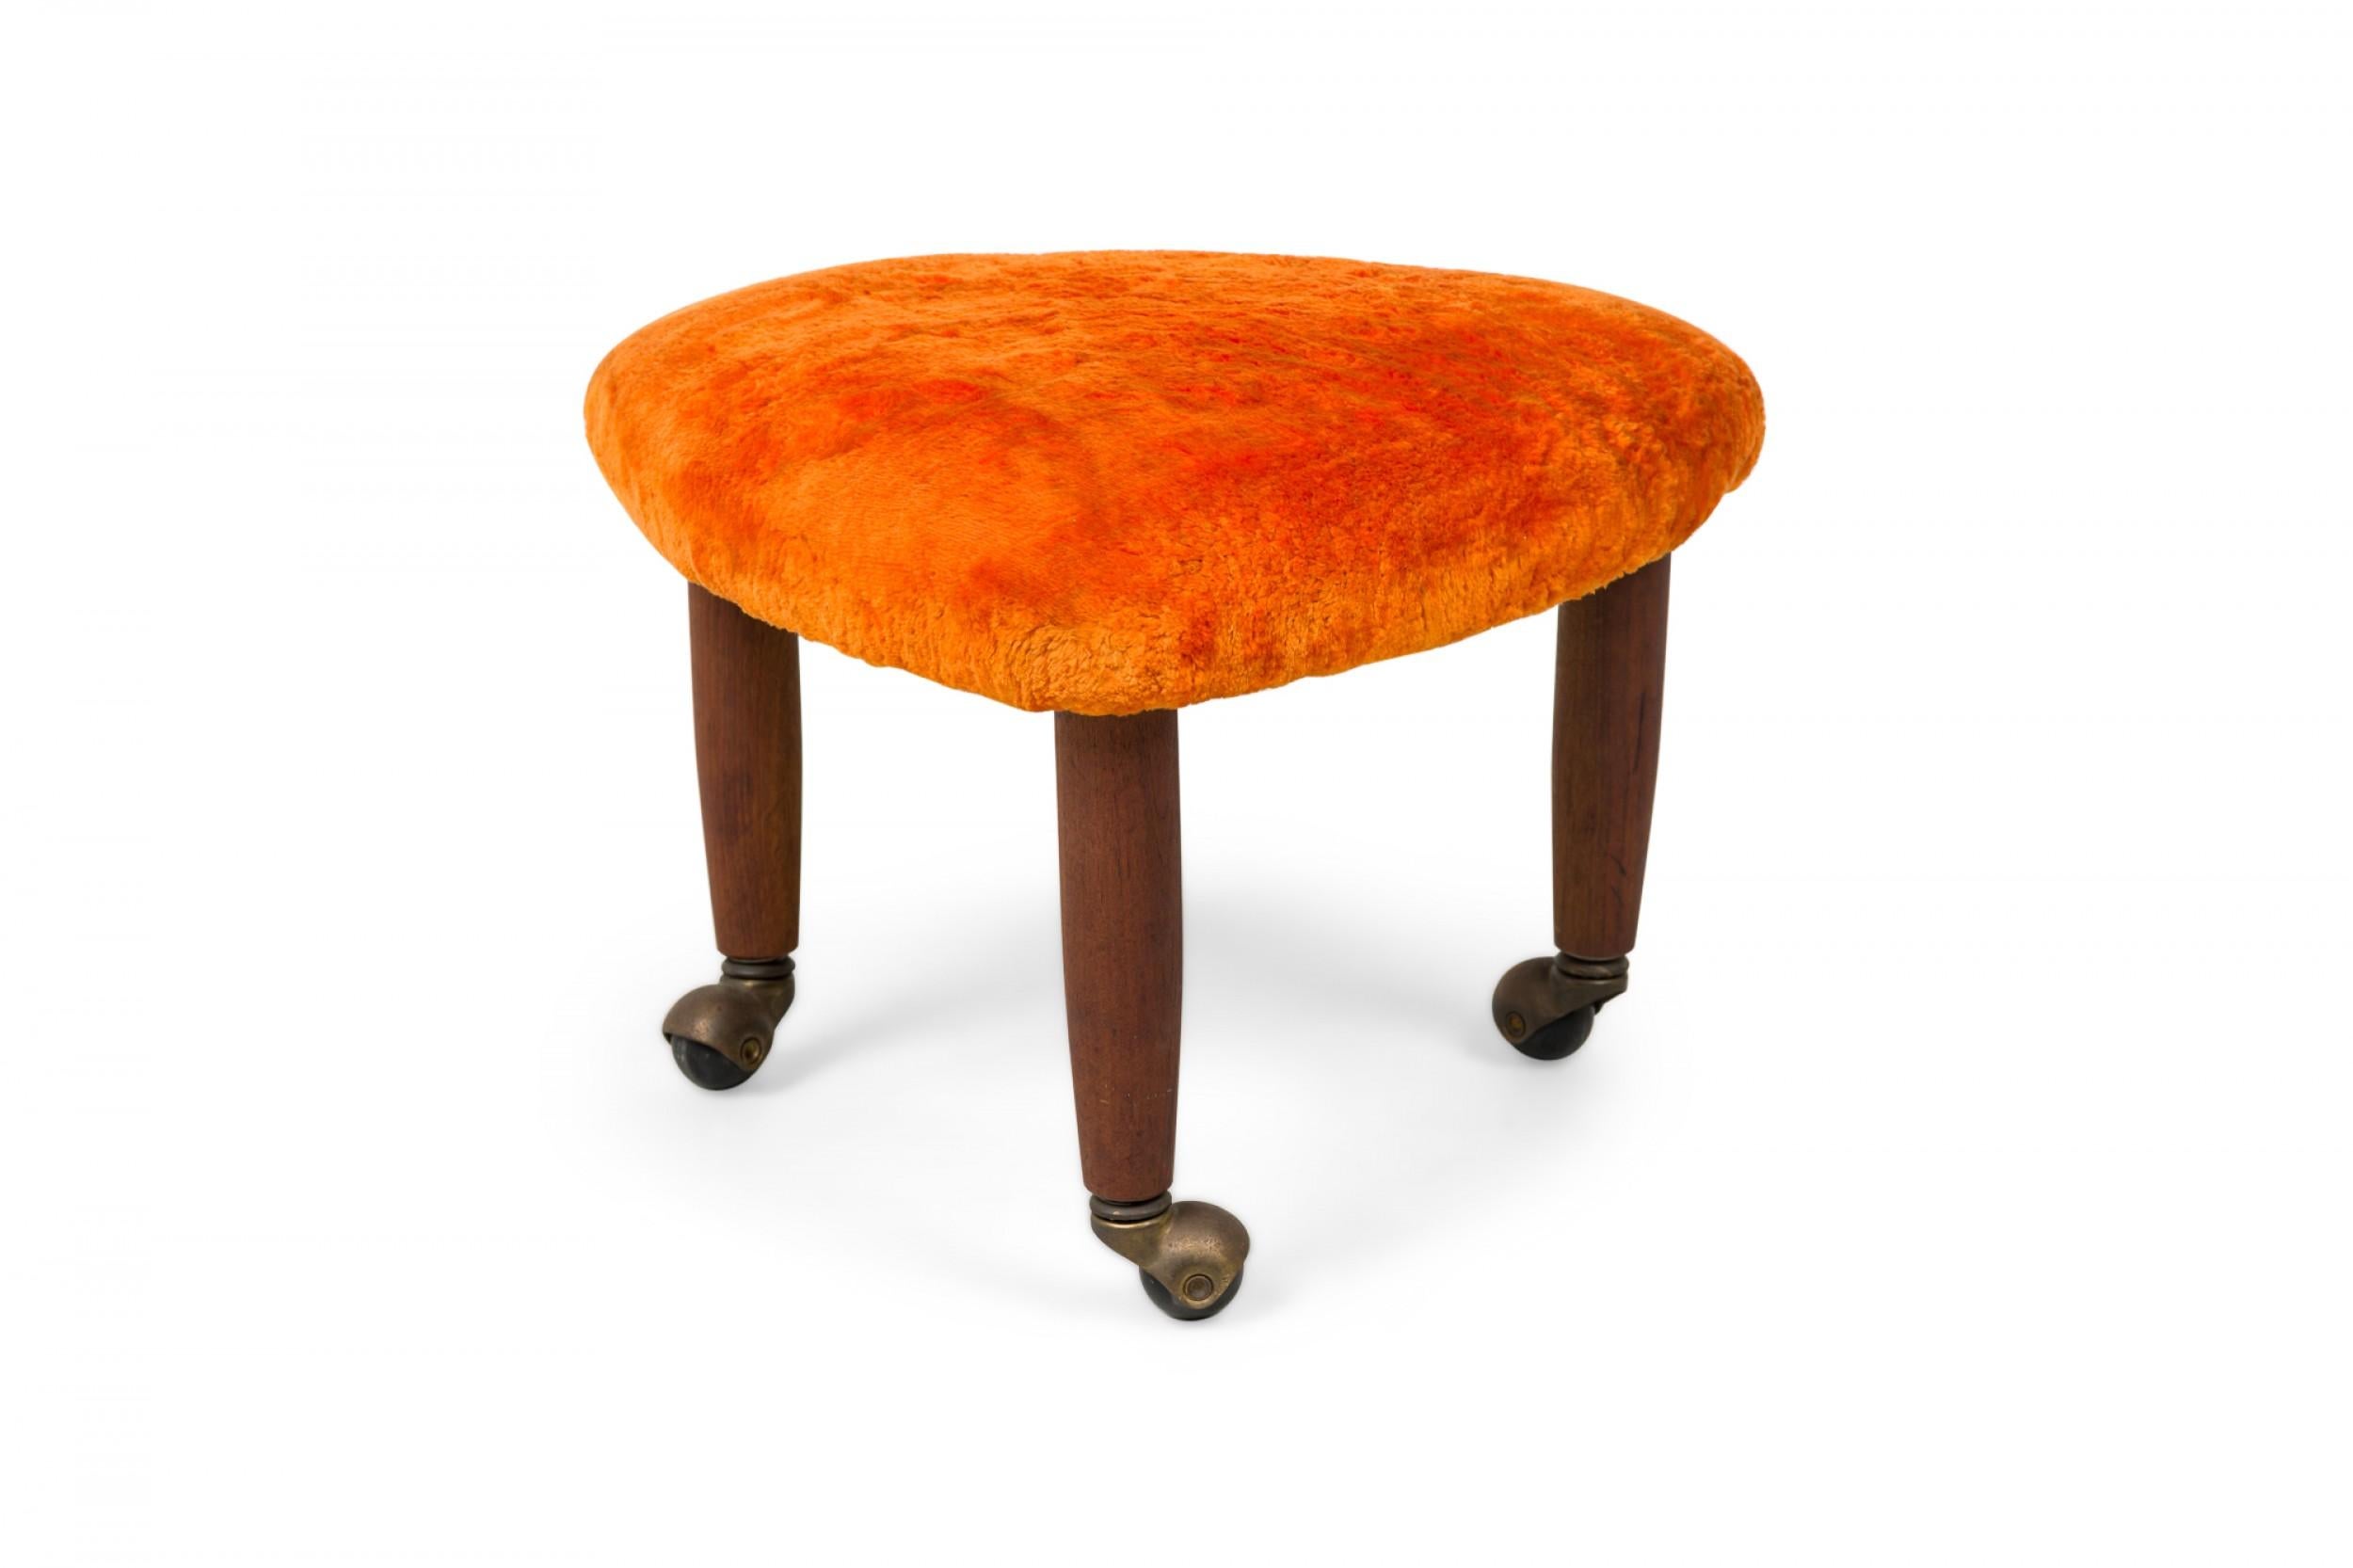 PAIR of midcentury Italian Modern triangular footstools, upholstered in plush orange velour, standing on 3 legs with brass casters. (manner of Gio Ponti) (PRICED AS PAIR)(Available in black: REG4086A).